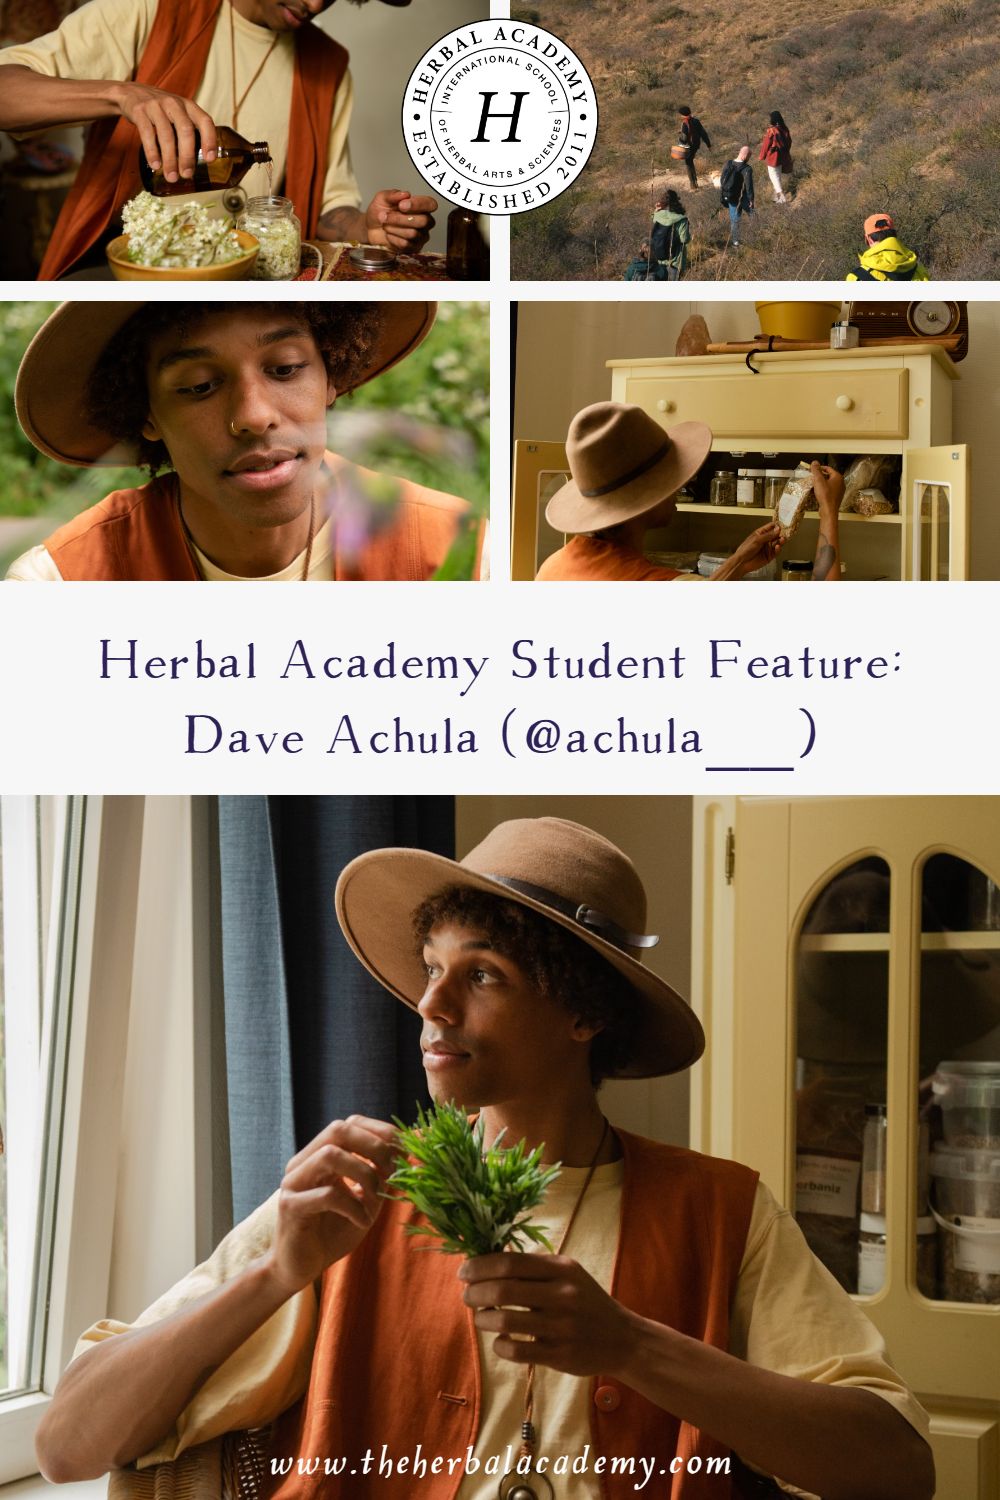 Herbal Academy Student Feature: Dave Achula (@achula__) | Herbal Academy | In this interview, we spoke with Dave Achula, the owner of Achula, an immersive experience that invites you to explore the healing of nature.